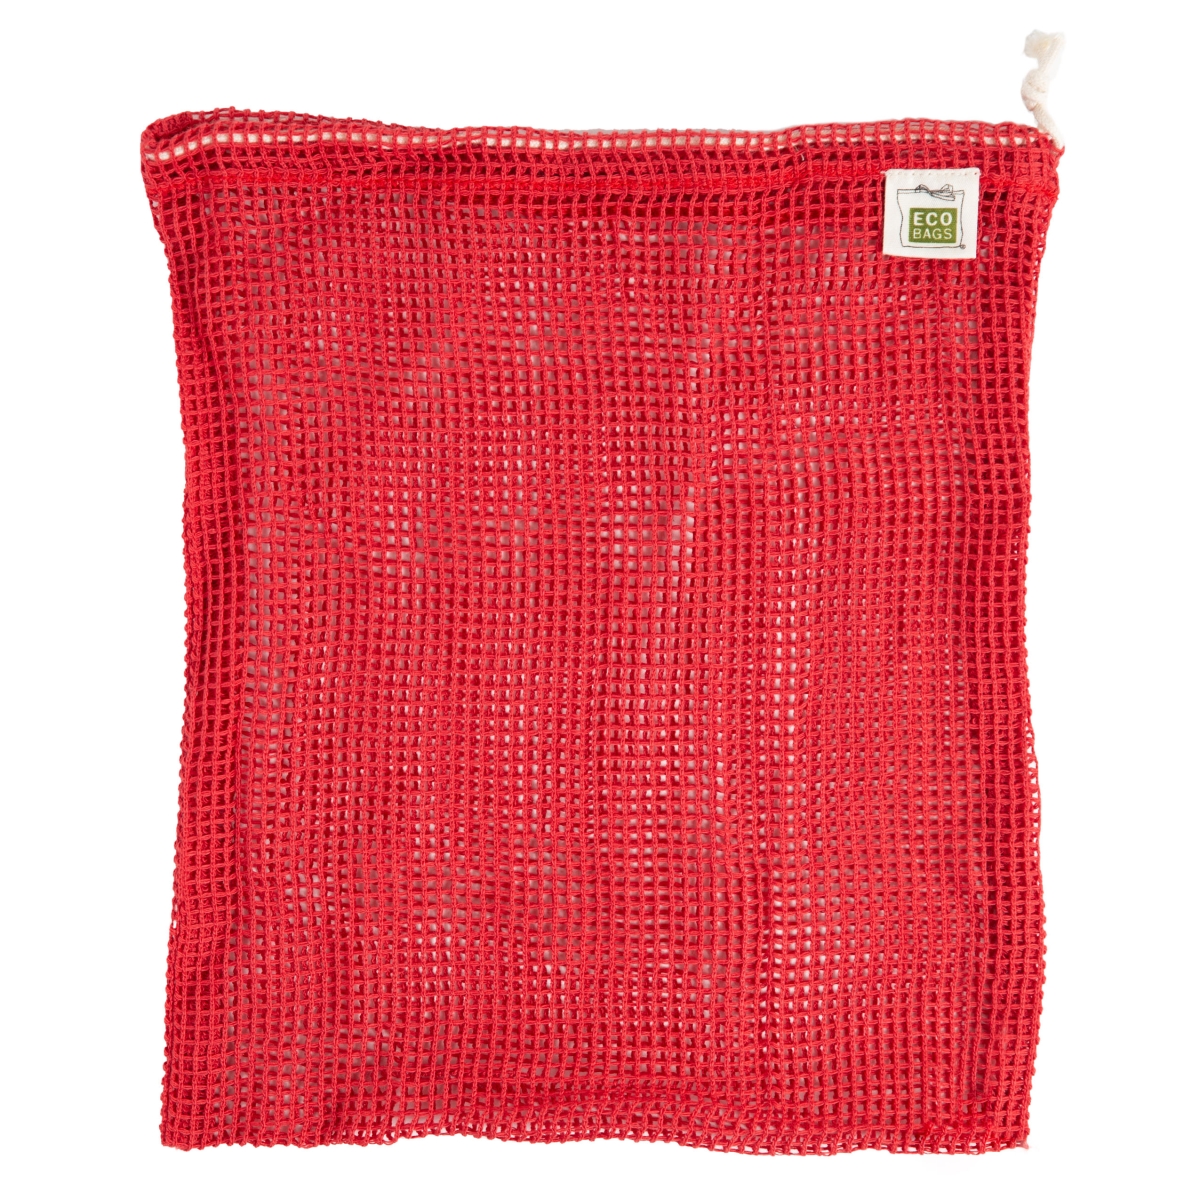 Picture of Eco-Bags 235994 10 x 12 in. Chili Net Drawstring Reusable Bags